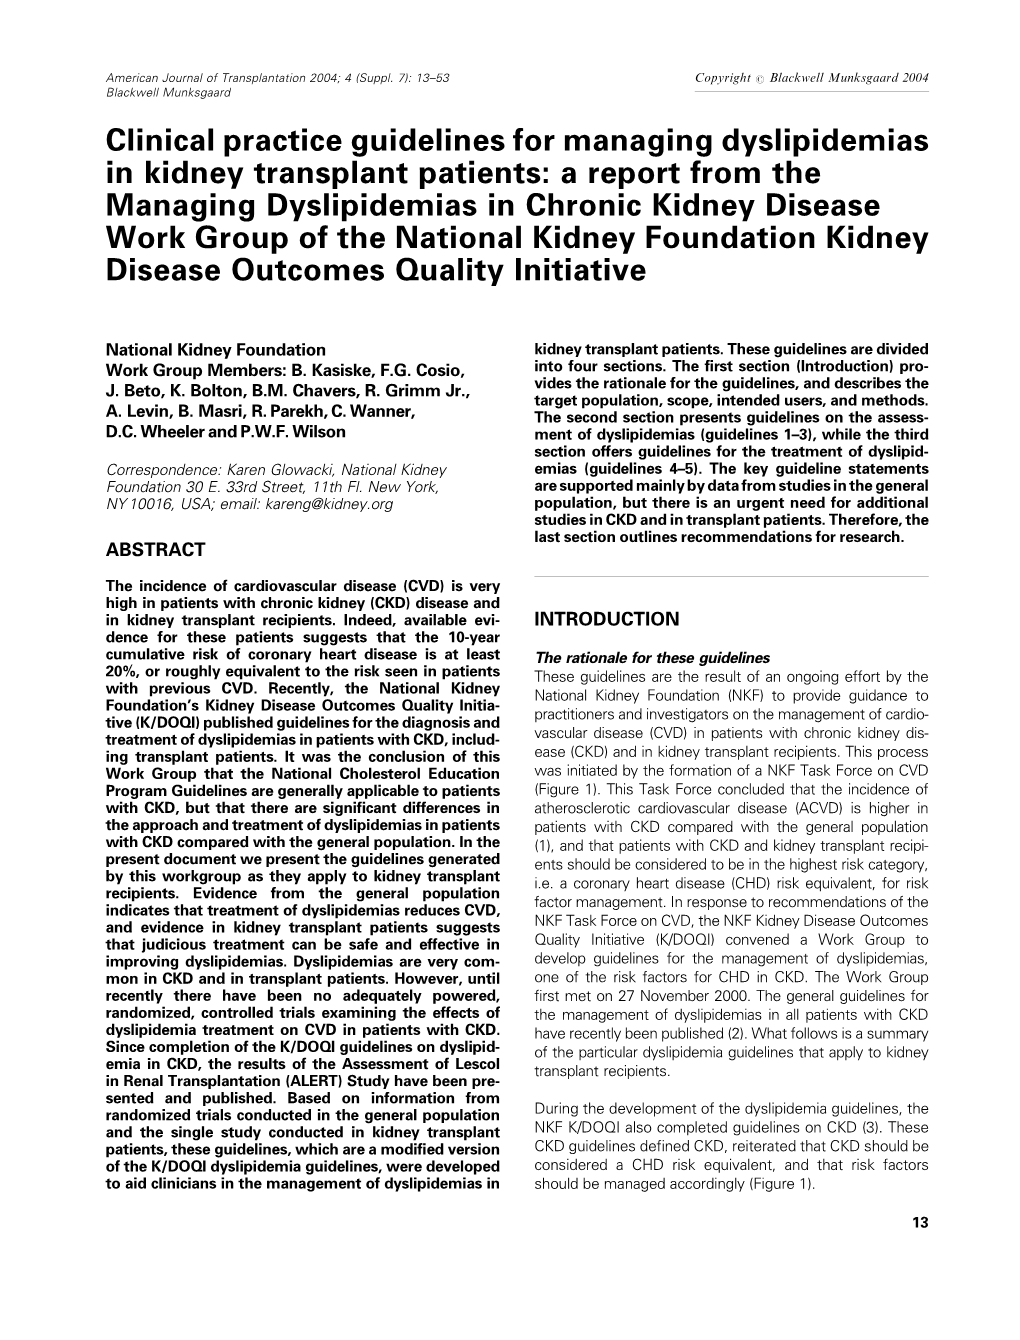 Clinical Practice Guidelines for Managing Dyslipidemias in Kidney